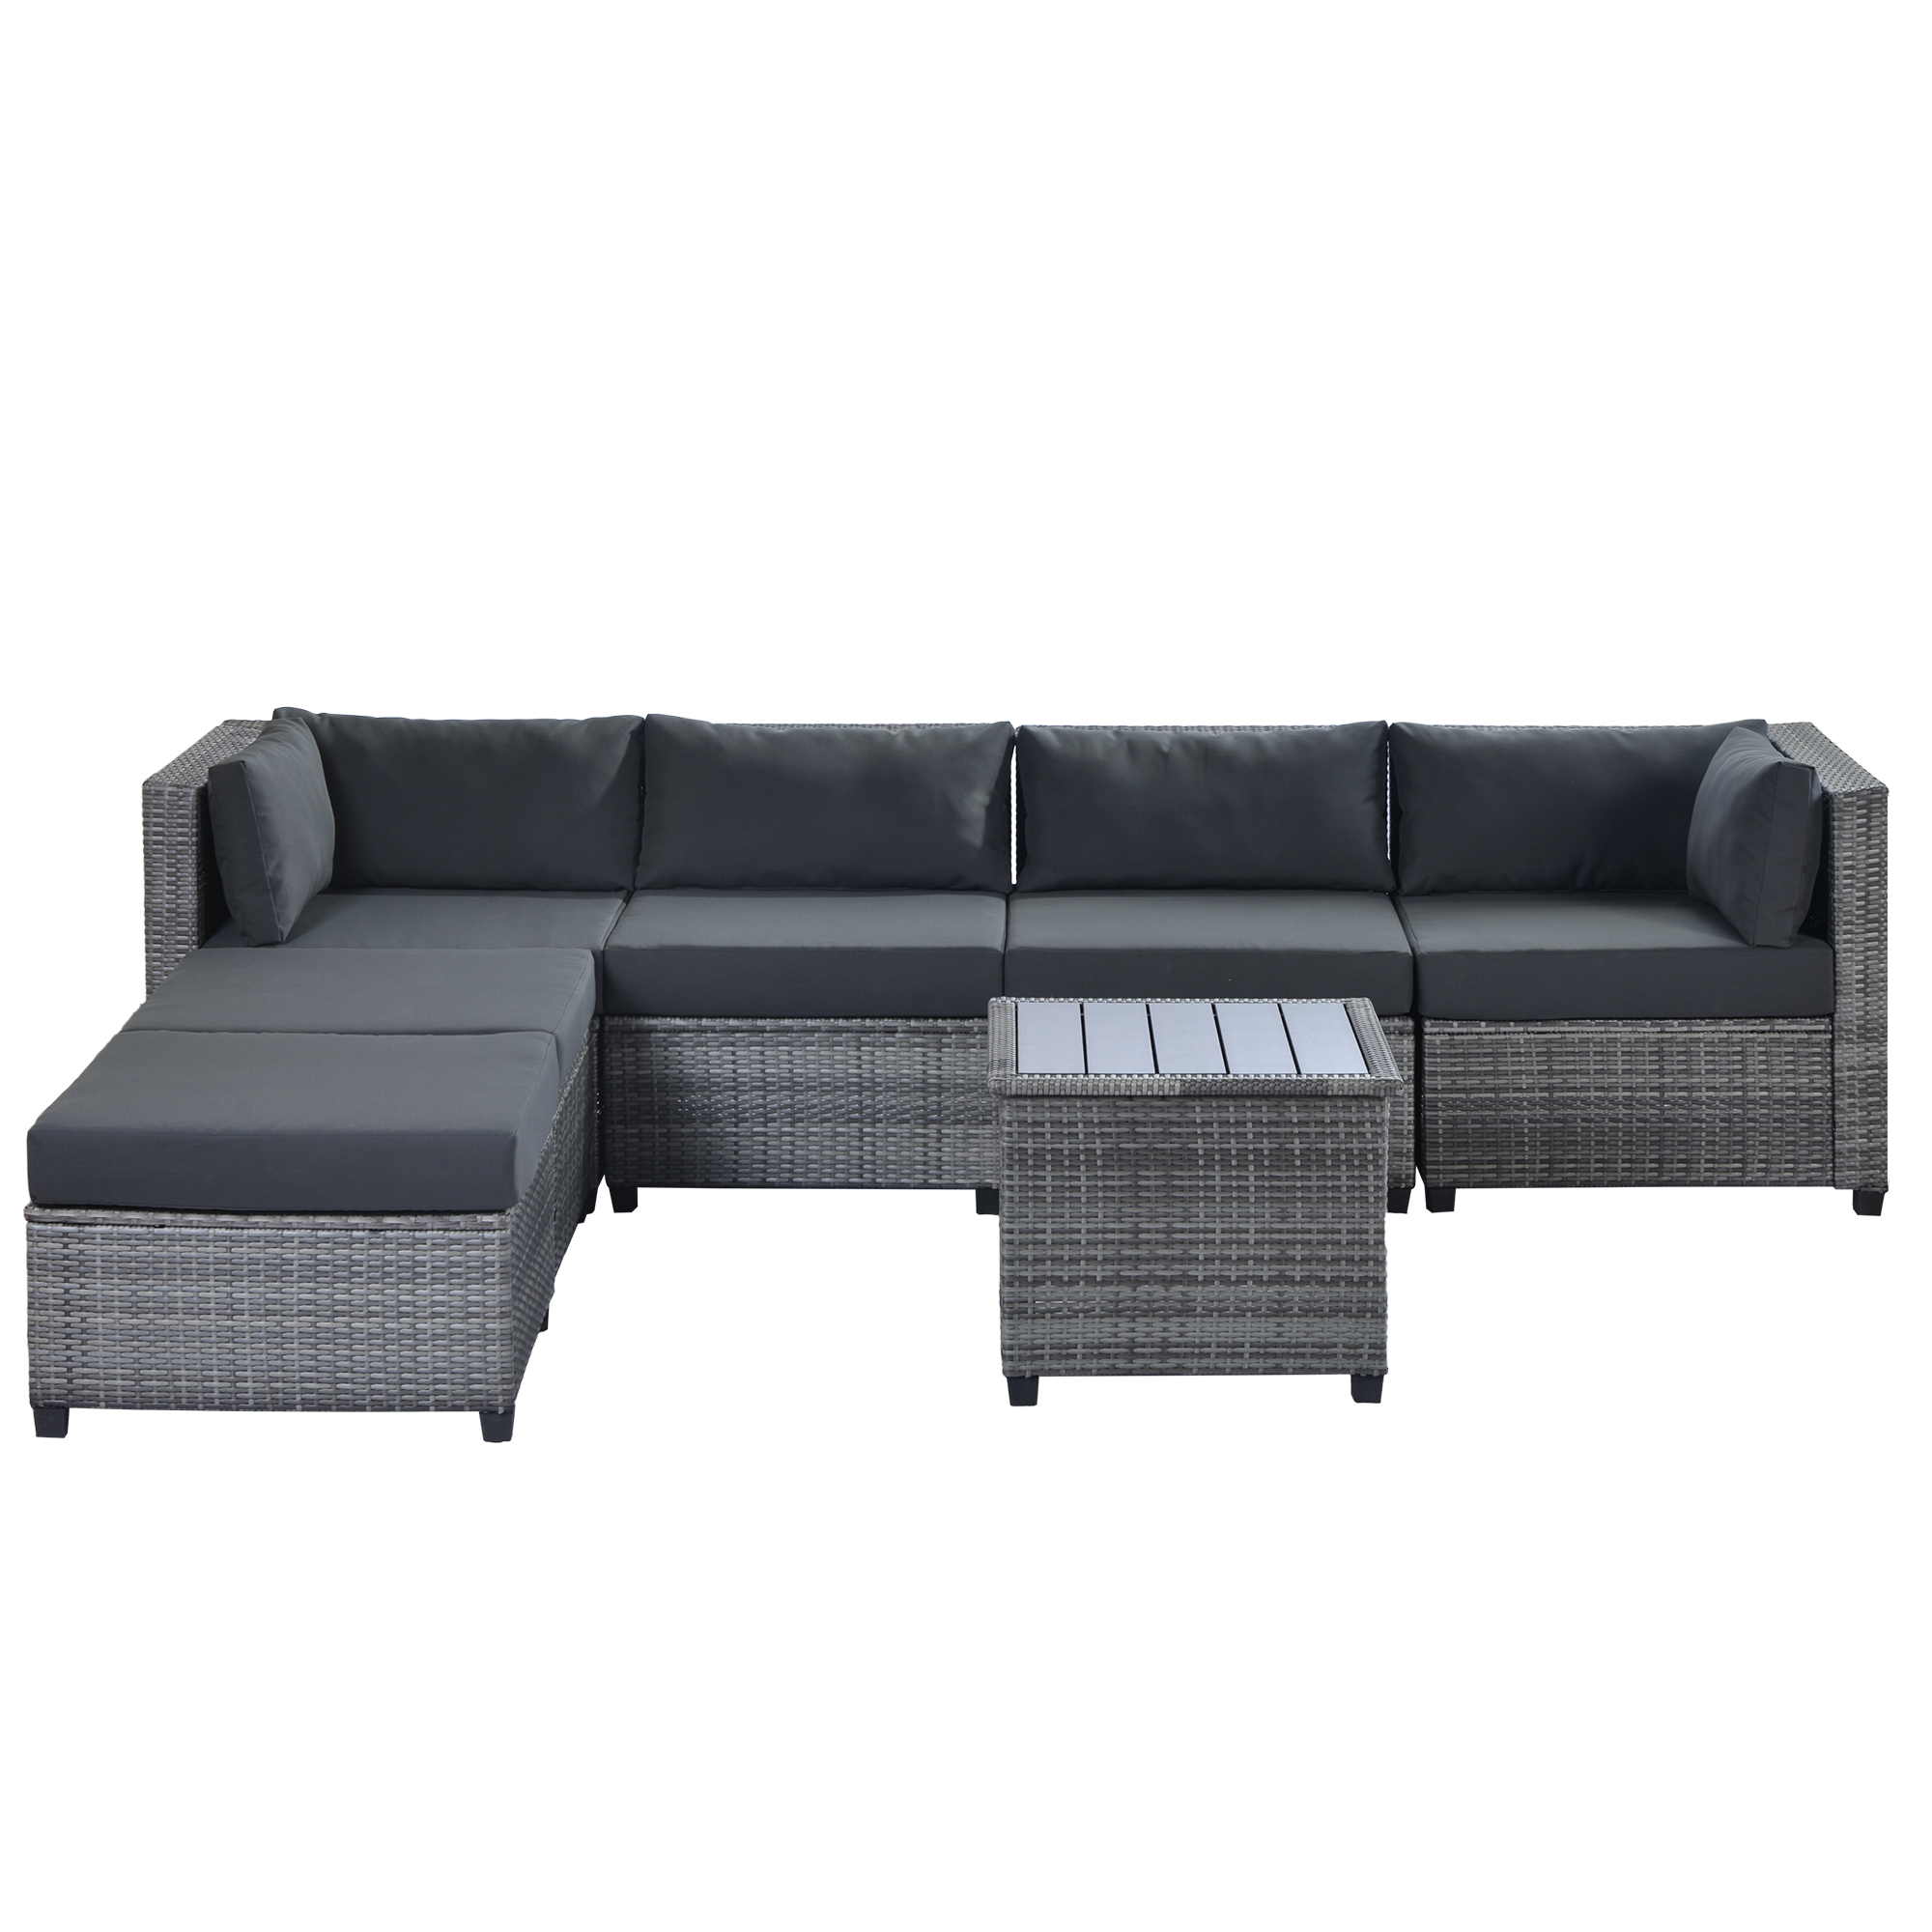 7 Piece Rattan Sectional Seating Group with Cushions, Outdoor Ratten Sofa -CASAINC